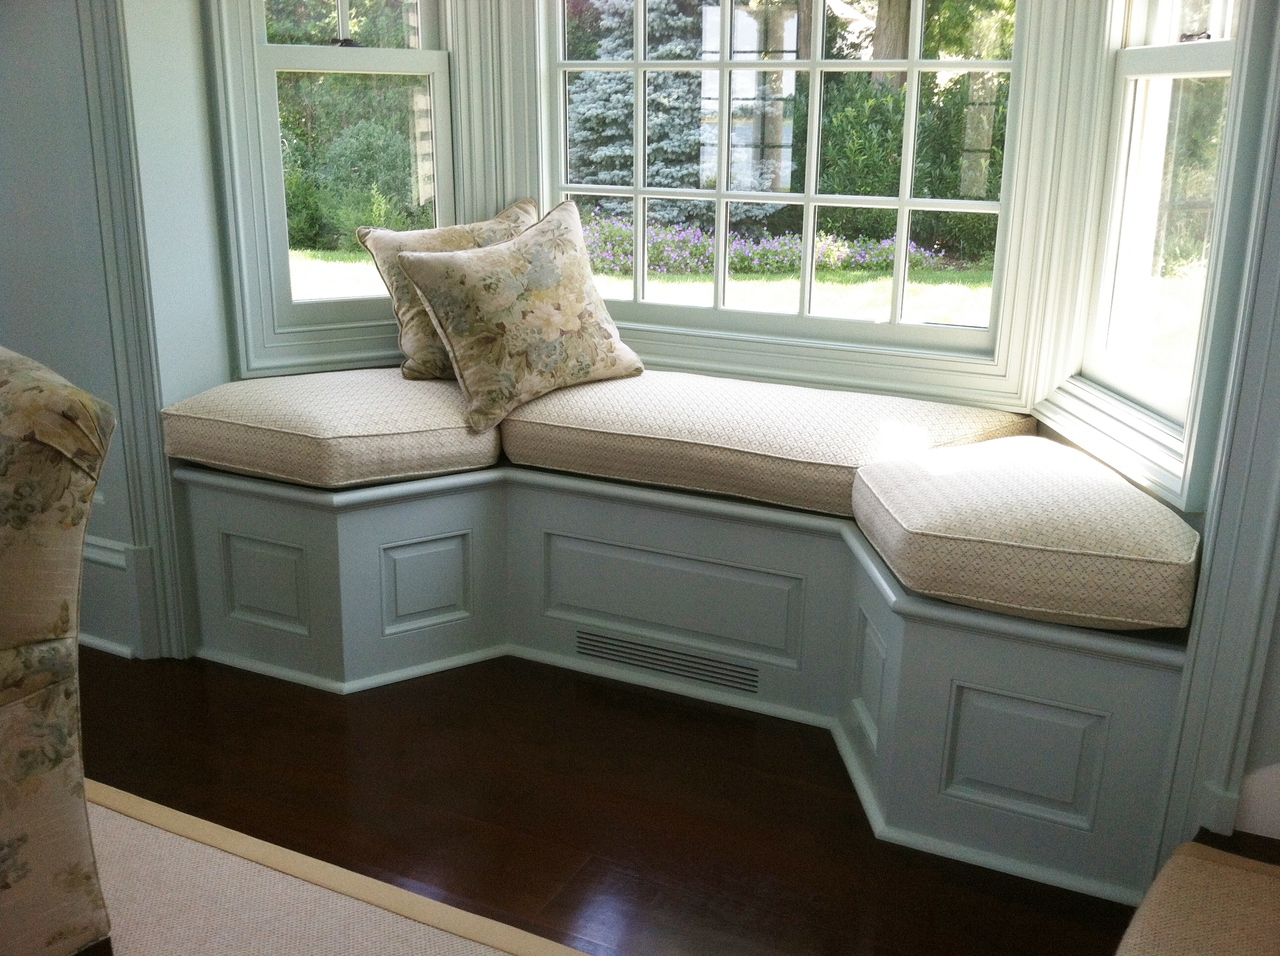 BESPOKE WINDOW SEAT CUSHION COVERS (EXCLUDING FABRIC) Square, rectangle